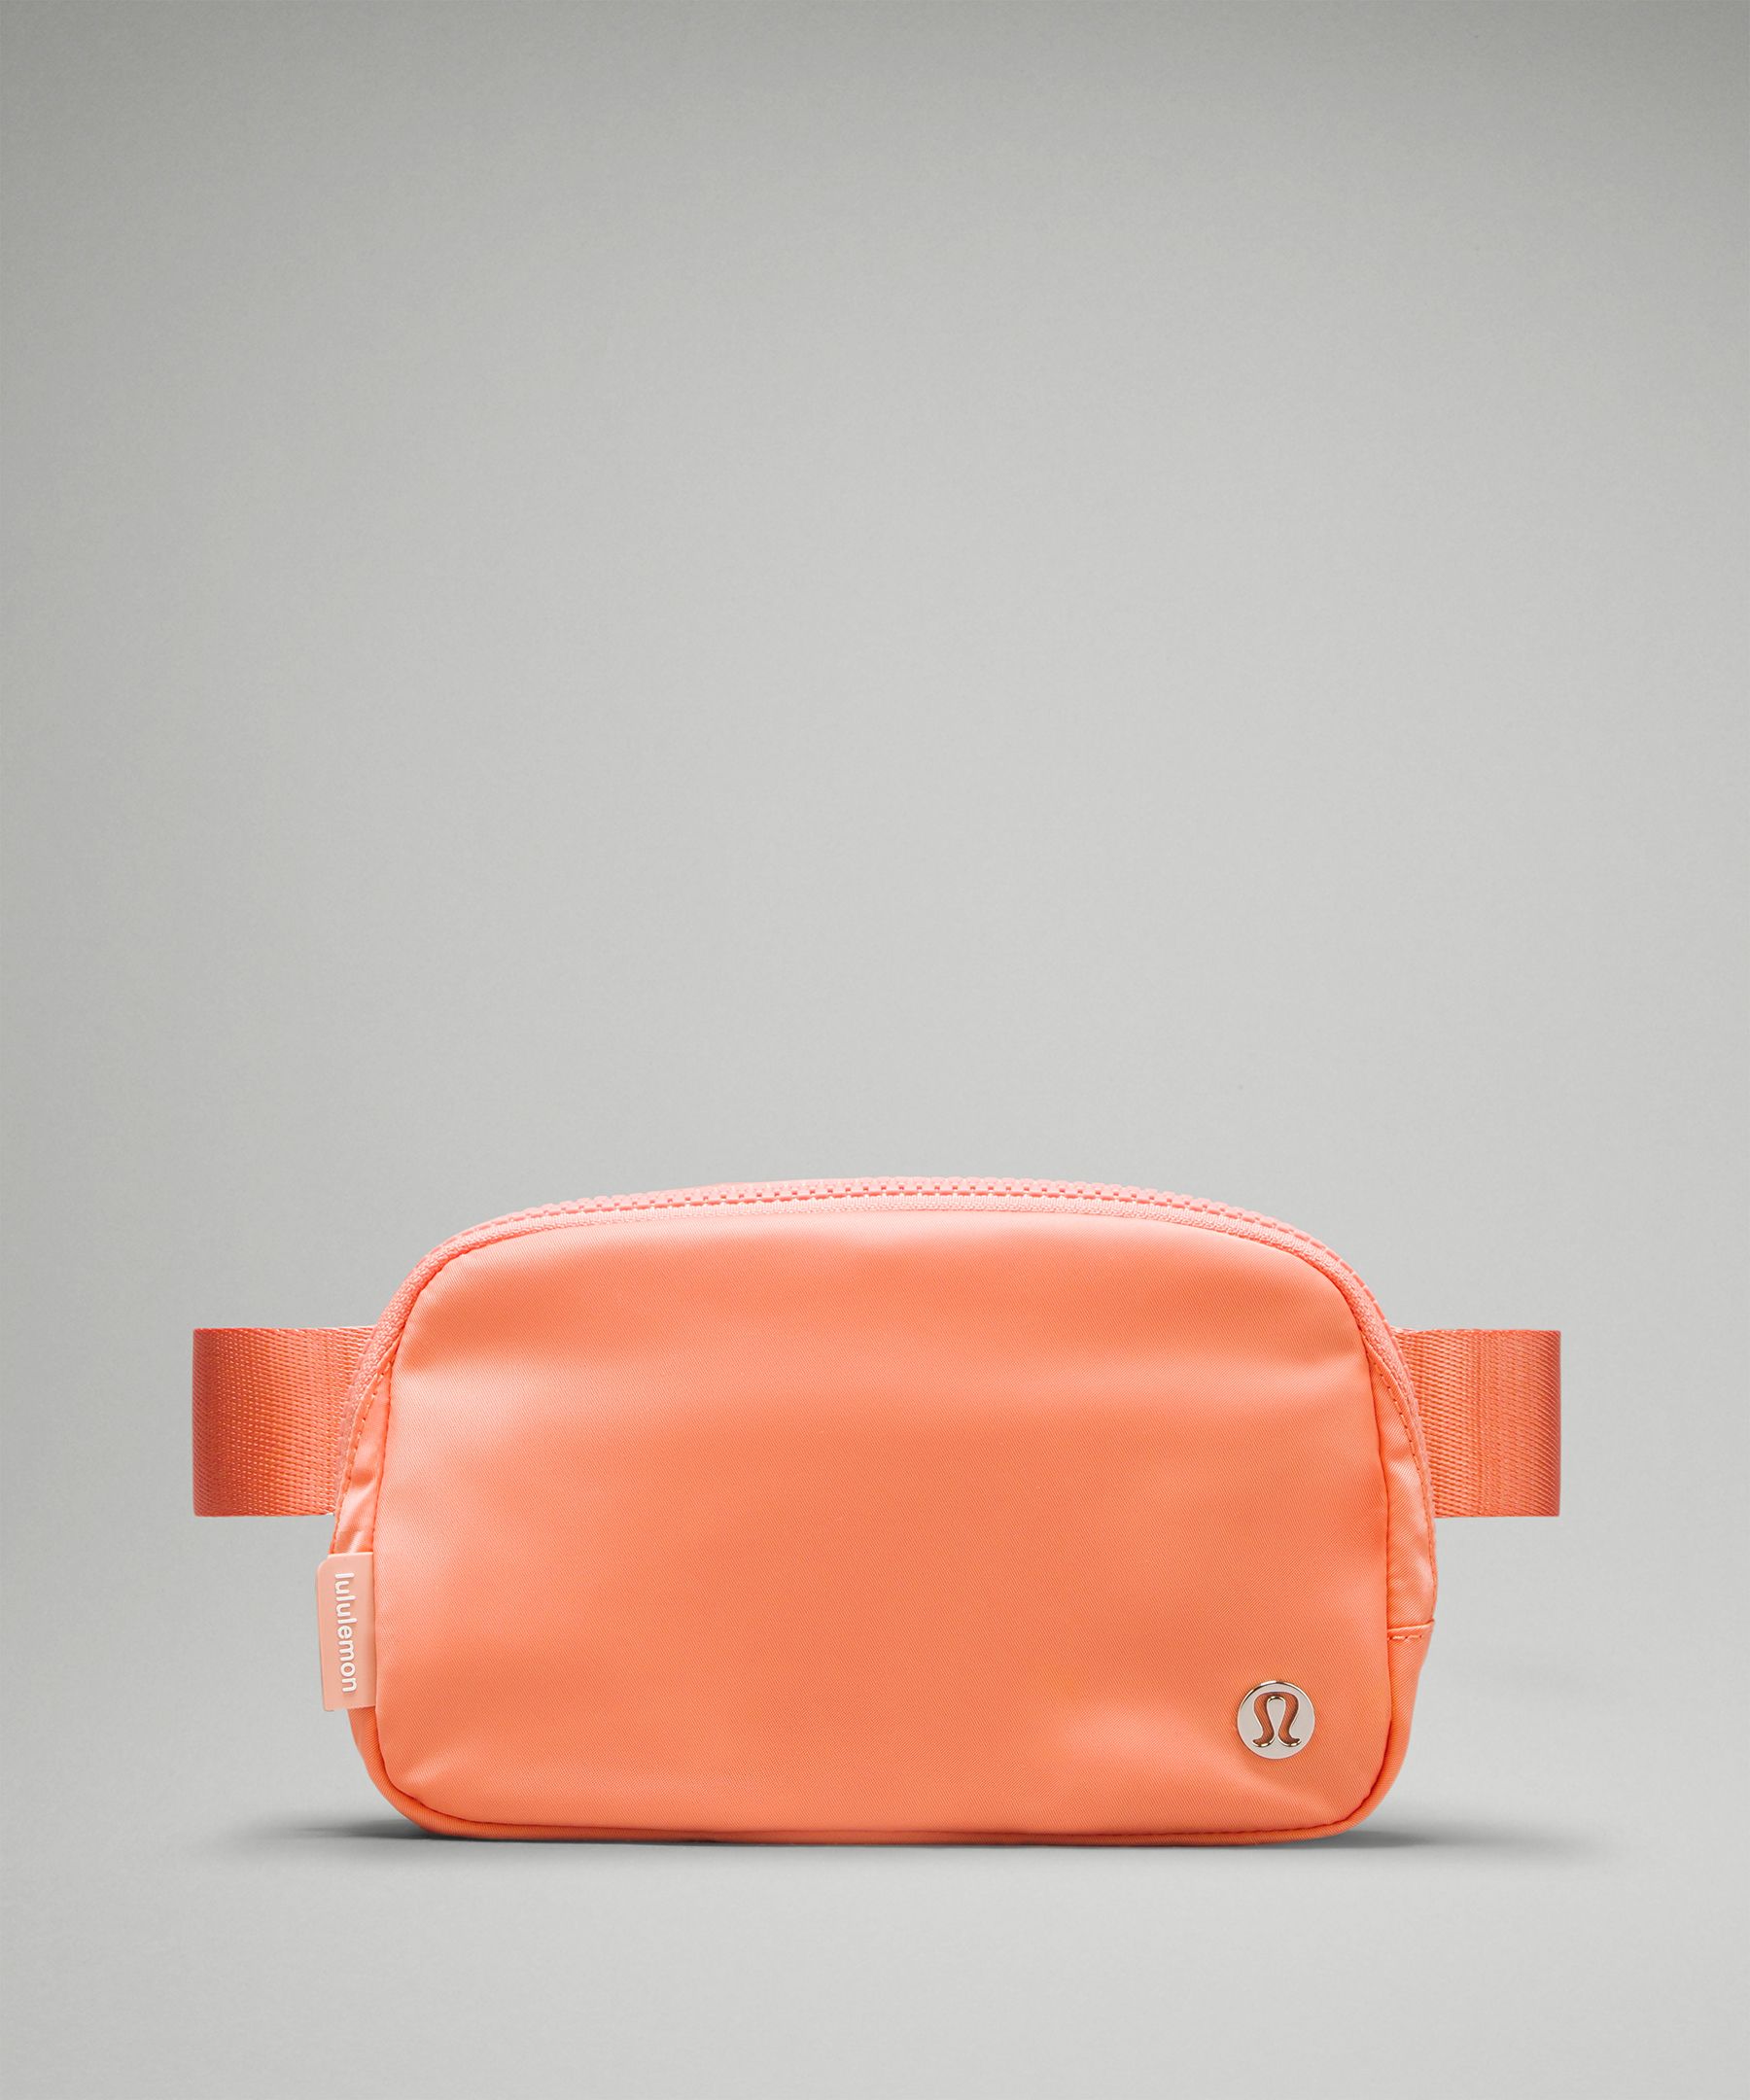 Upcoming Lululemon Colors, The lululemon Everywhere Belt Bag is back in  stock in all sizes and.